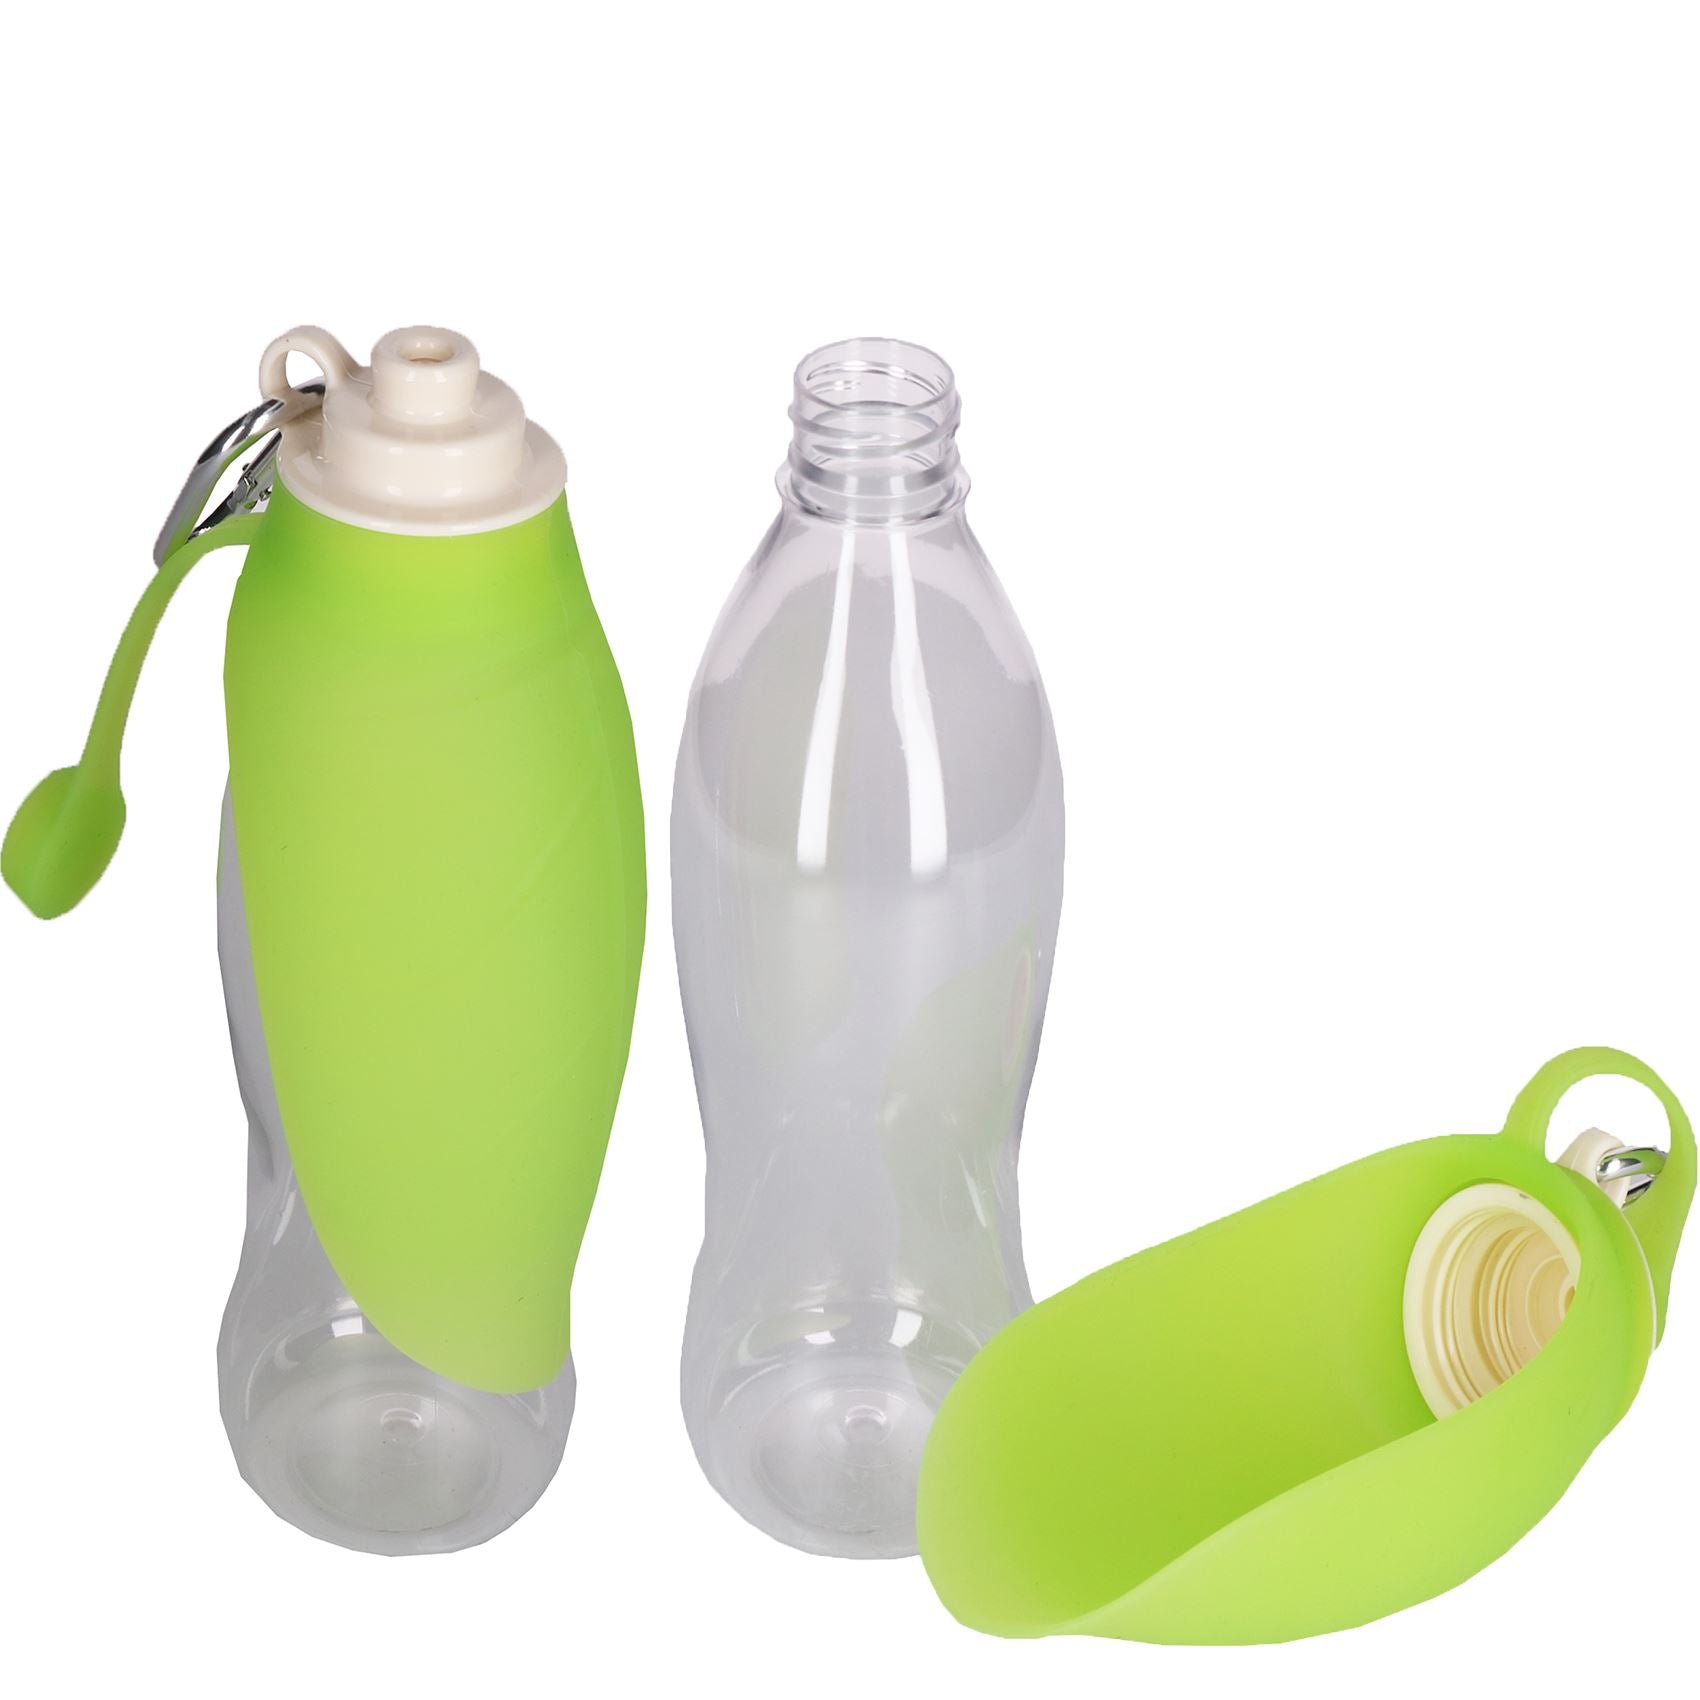 2pk Portable Leaf Travel Bottle For Pets Dogs On The Move In The Great Outdoor